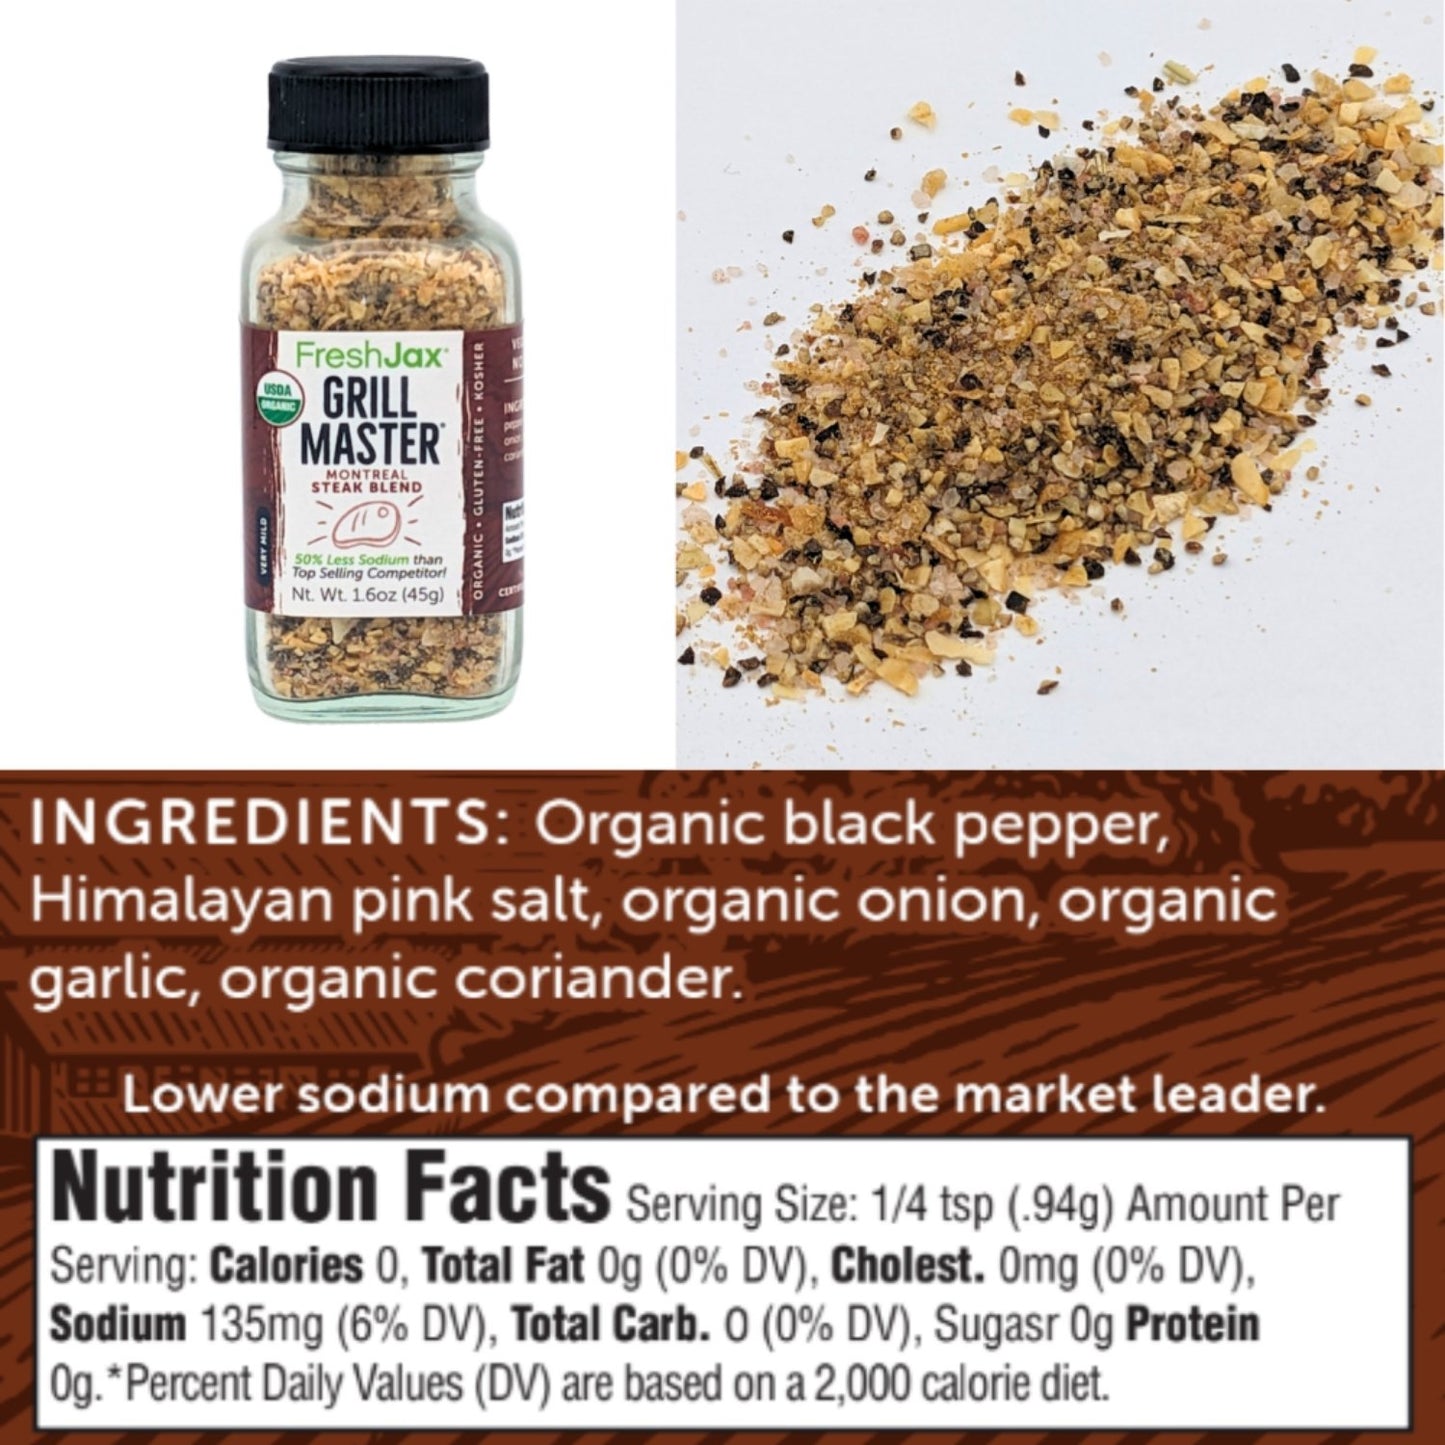 FreshJax Organic Spices Grill Master Steak Ingredients and Nutritional Information